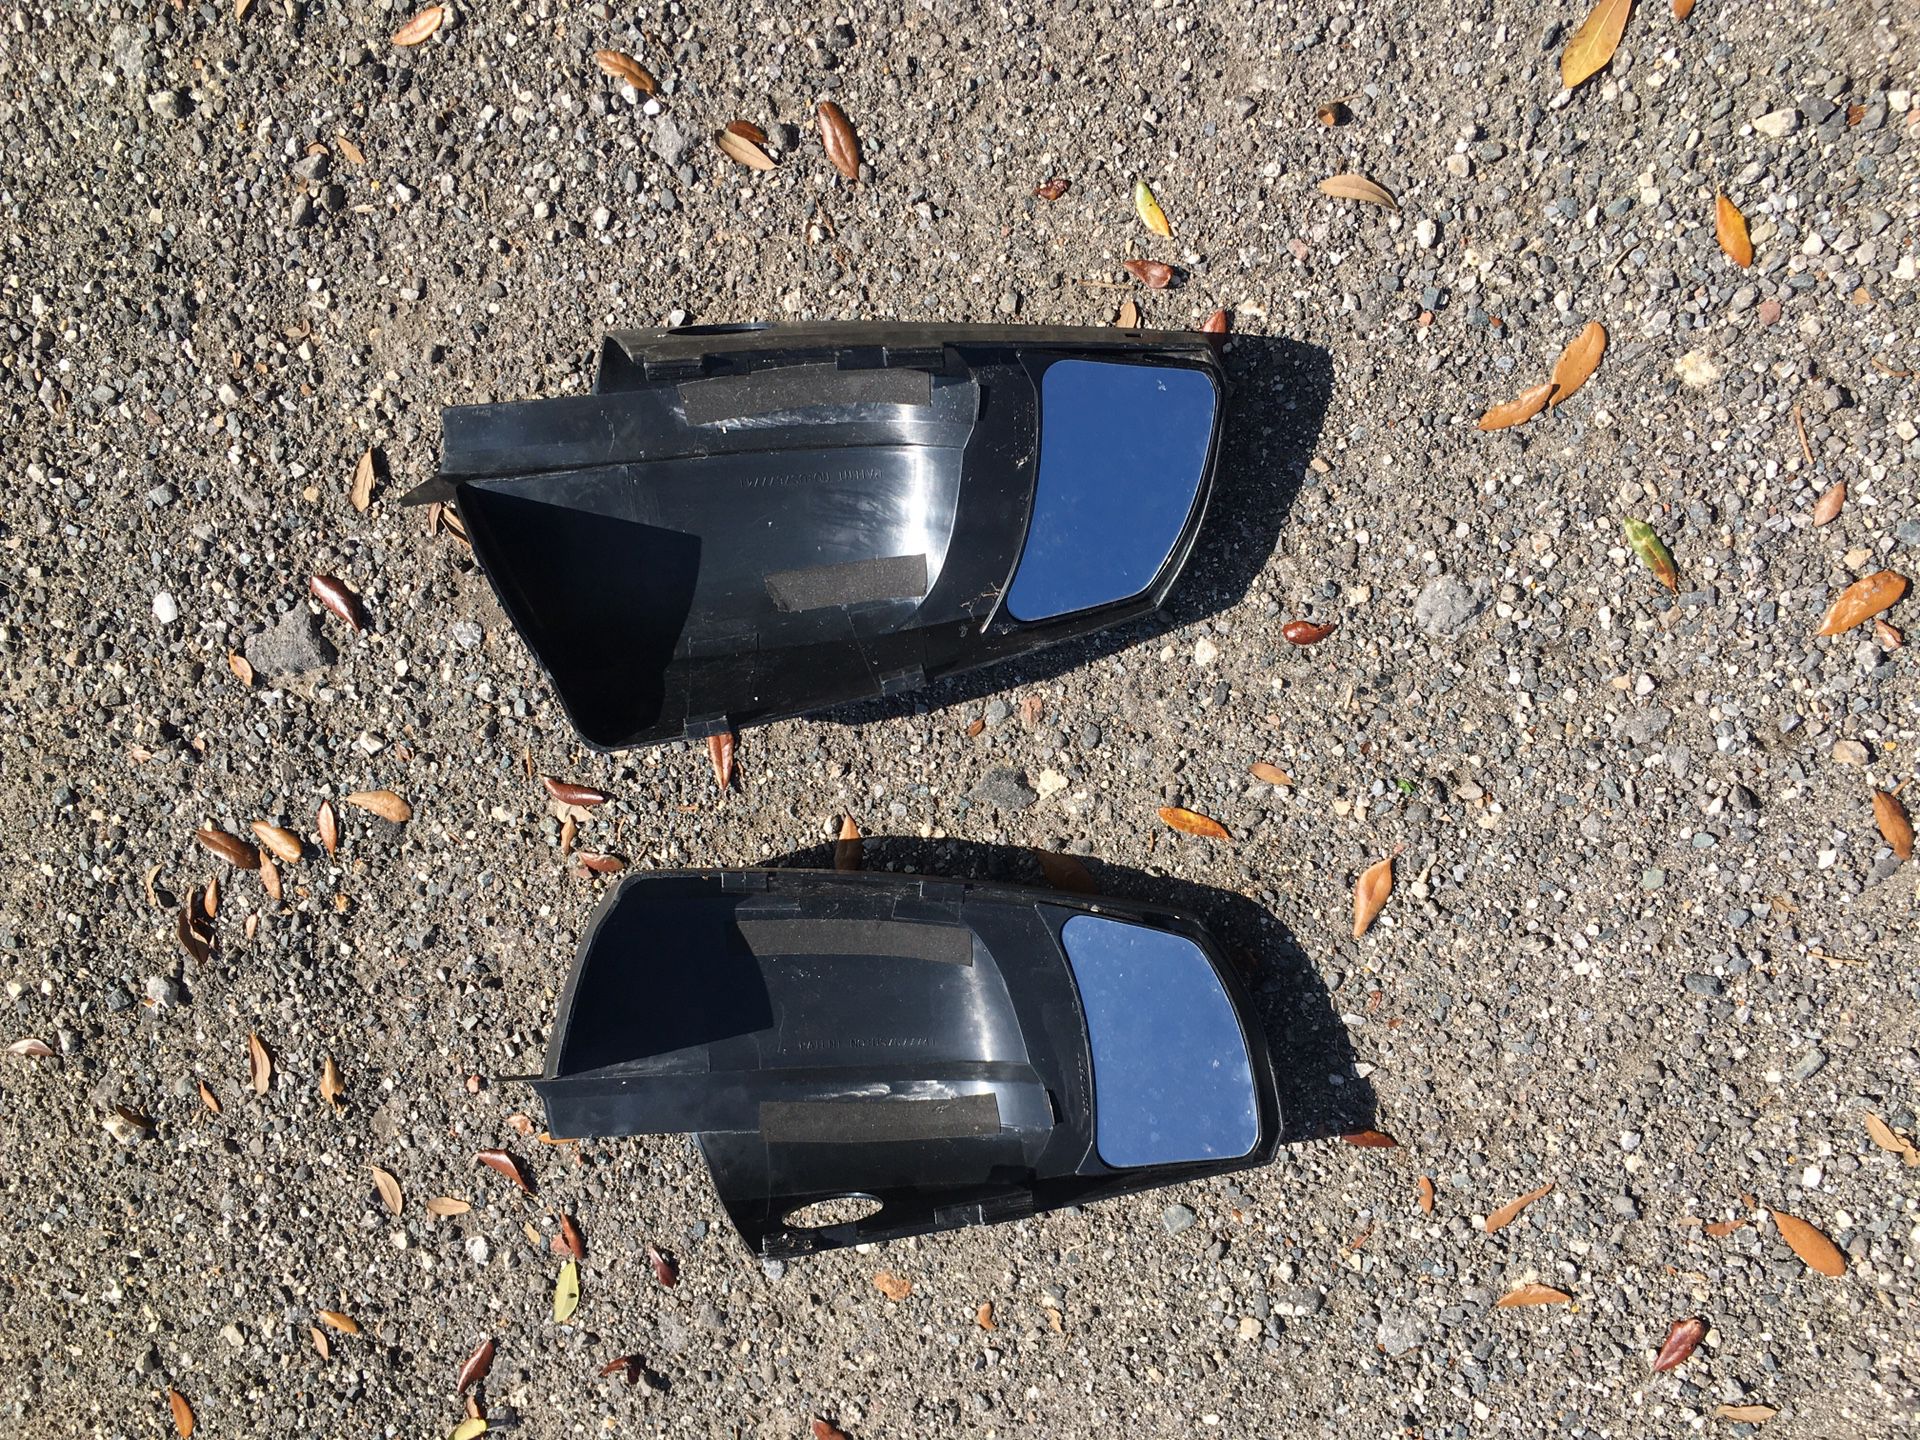 2014 Toyota tundra accessory package extended mirrors for towing plus many other items including original seat covers for 2014